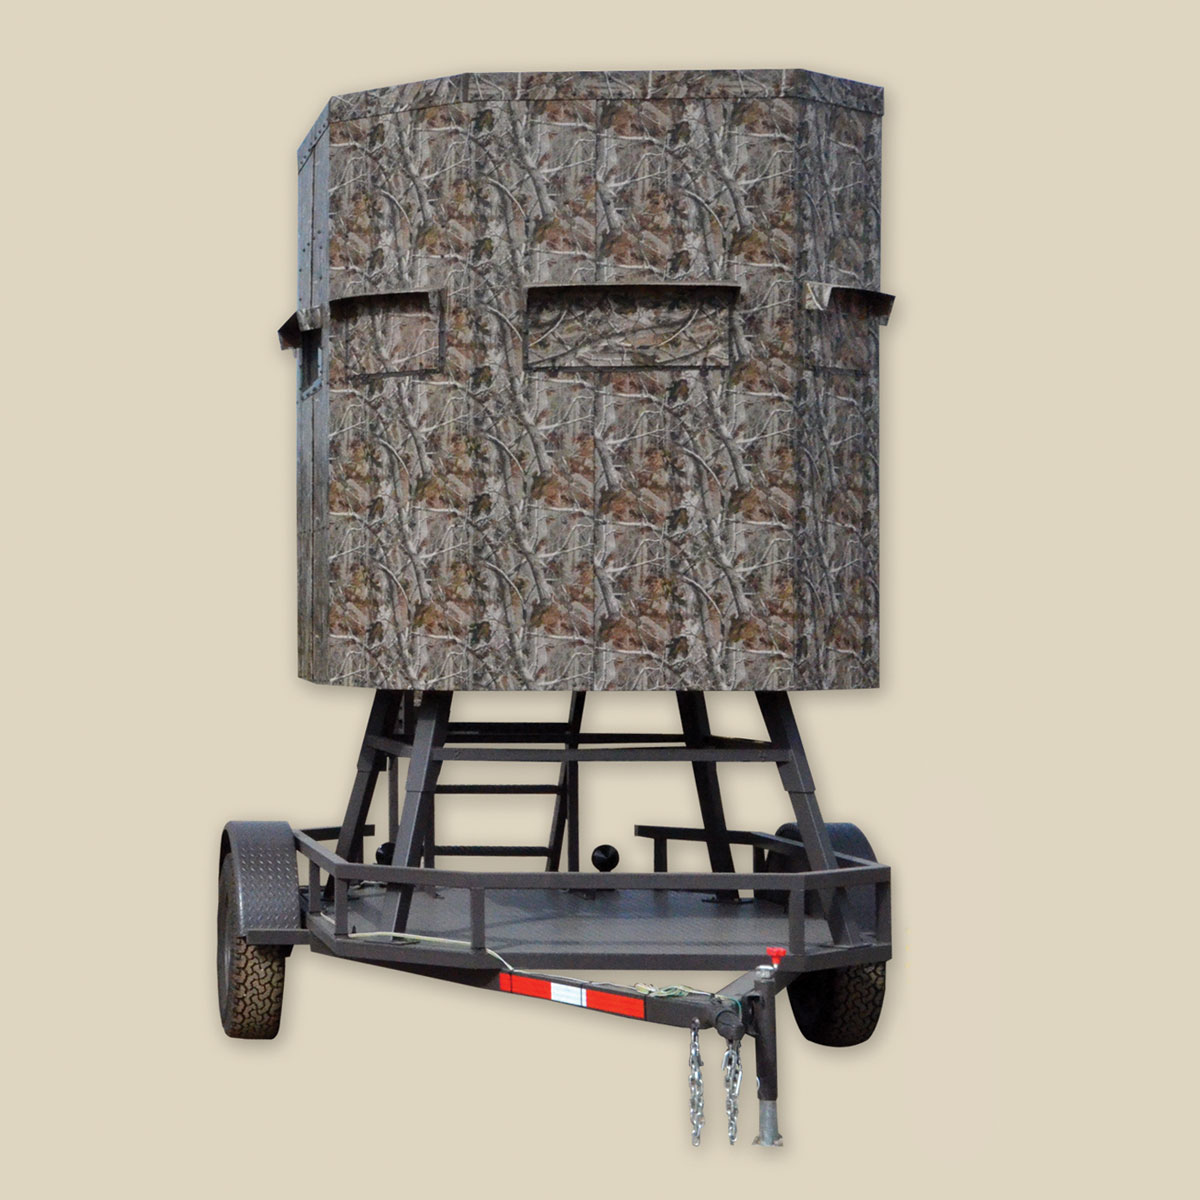 RANCH KING 6×6 ECONOMY ELEVATED TRAILER BLIND